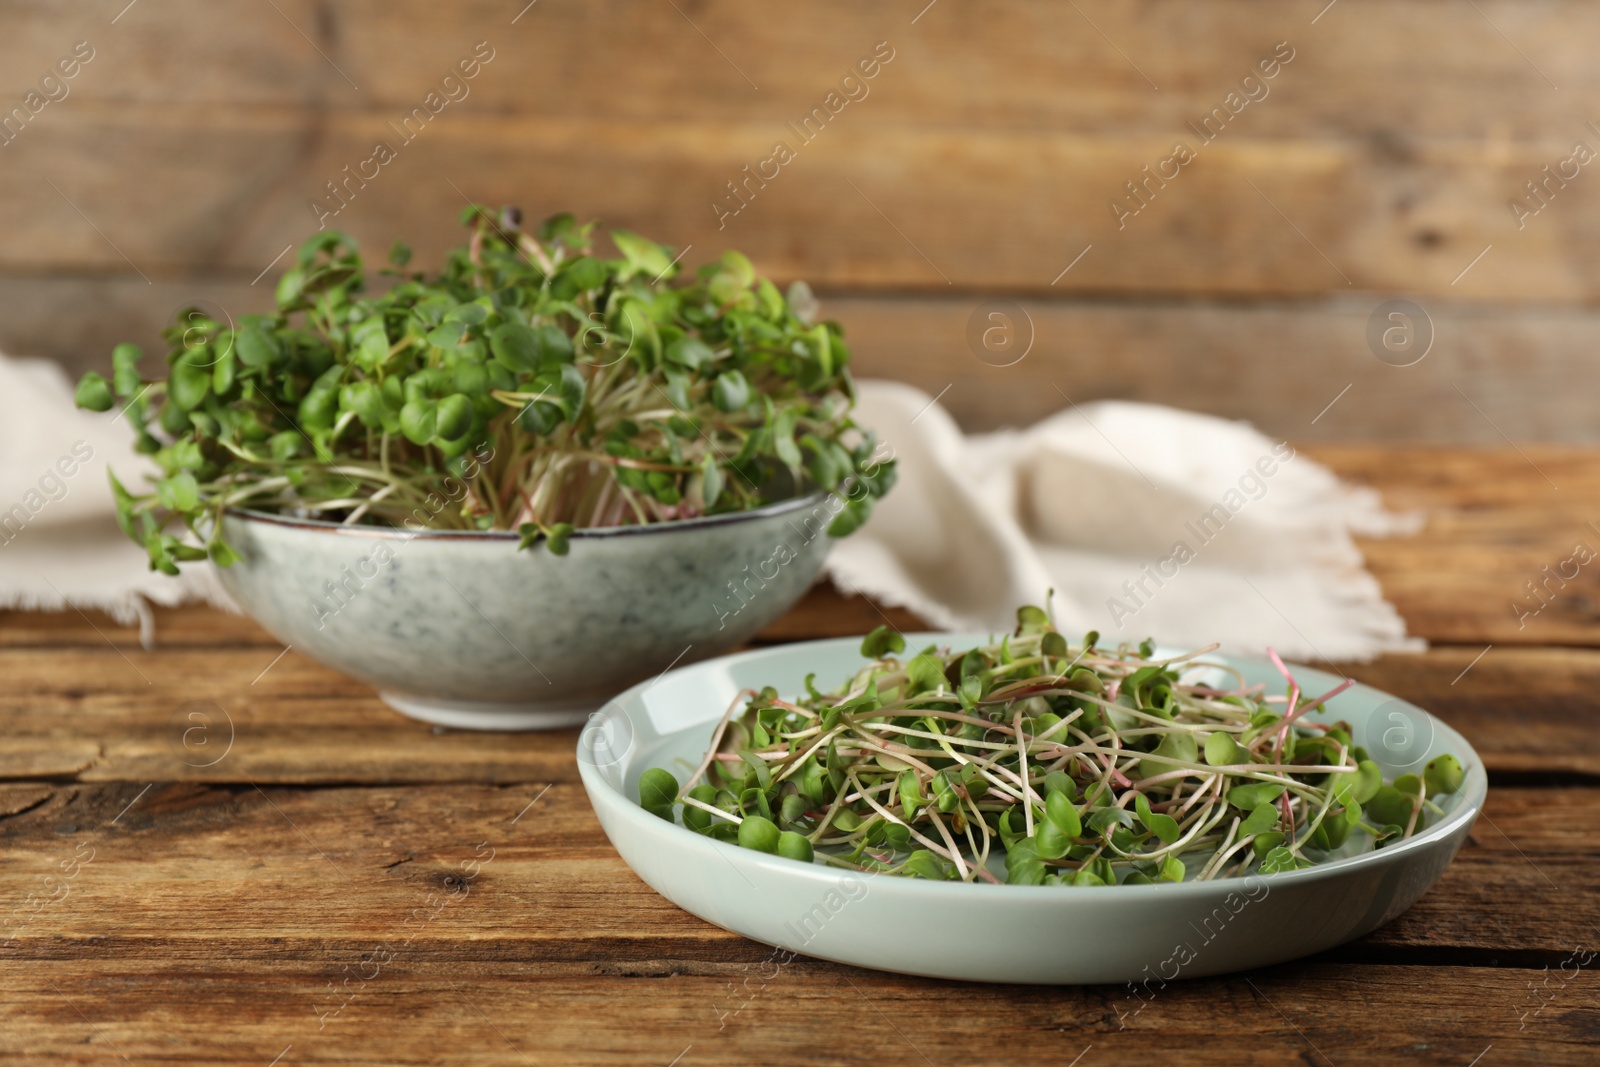 Photo of Plate and bowl with fresh radish microgreens on wooden table